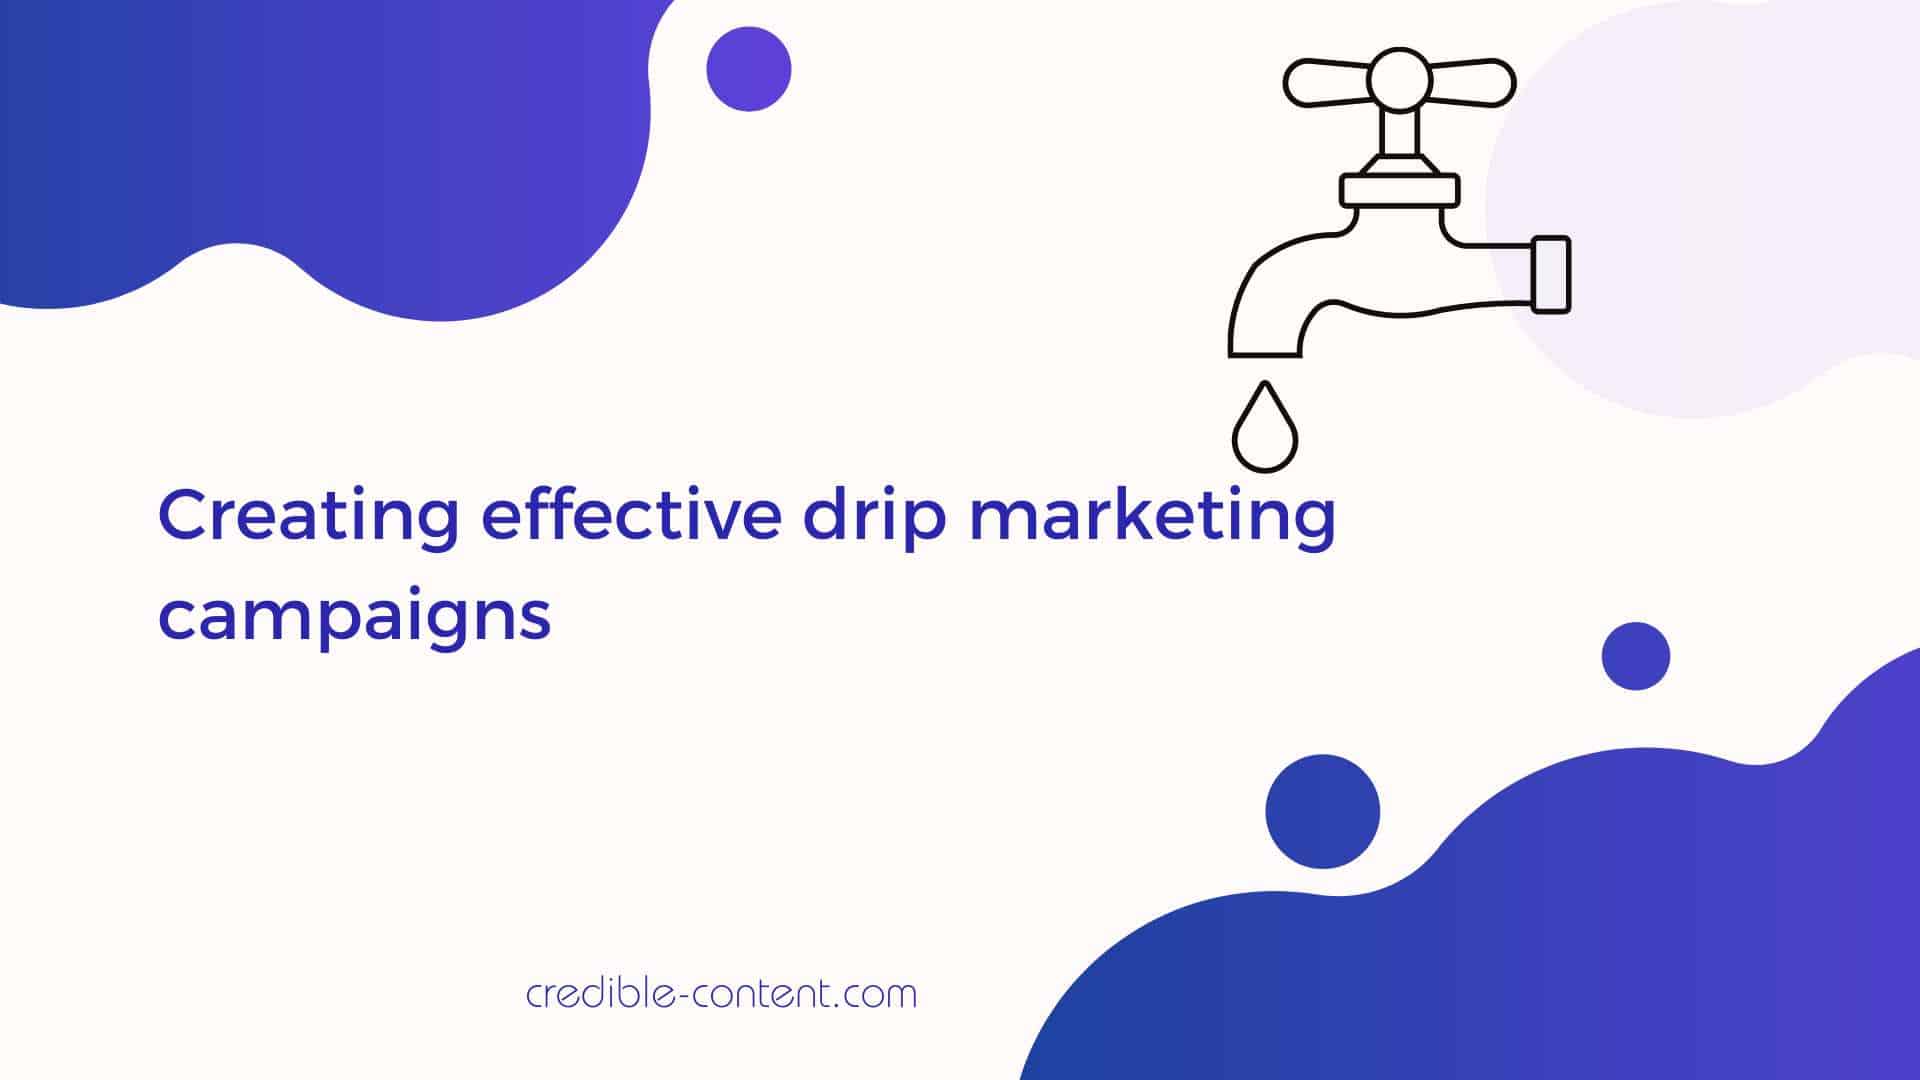 Creating effective drip marketing campaigns